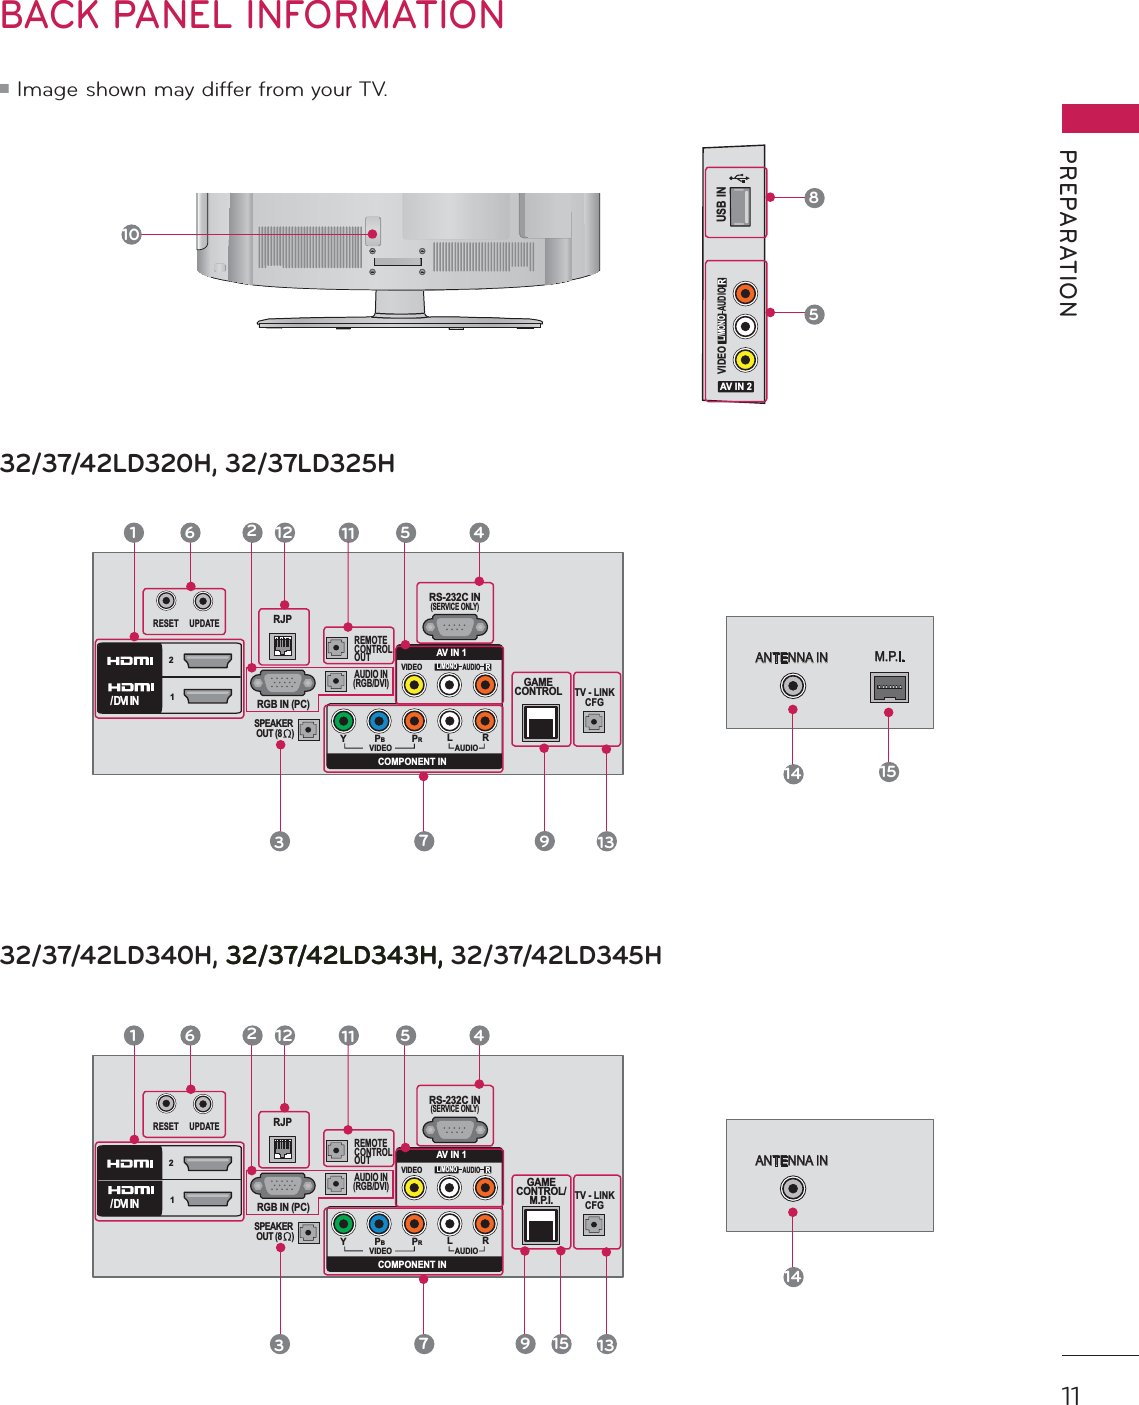 11PREPARATIONBACK PANEL INFORMATIONᯫ Image shown may differ from your TV.10USB INAV IN 2VIDEOAUDIOL/MONOR85RGB IN (PC)AUDIO IN(RGB/DVI)RS-232C IN(SERVICE ONLY)VIDEOAUDIOL/MONORVIDEO AUDIOCOMPONENT INAV IN 1YPBPRLR21/DVIINREMOTECONTROLOUTSPEAKER OUT (8     )  RJPRESETUPDATETV - LINKCFGGAMECONTROL1211 5  47312691332/37/42LD320H, 32/37LD325HANTENNA IN M.P.I.14 1532/37/42LD340H, 32/37/42LD343H, 32/37/42LD345HANTENNA IN14RGB IN (PC)AUDIO IN(RGB/DVI)RS-232C IN(SERVICE ONLY)VIDEOAUDIOL/MONORVIDEO AUDIOCOMPONENT INAV IN 1YPBPRLR21/DVIINREMOTECONTROLOUTSPEAKER OUT (8     )  RJPRESETUPDATETV - LINKCFGGAMECONTROL/M.P.I.1211 5  4731269131532/37/42LD343H, 